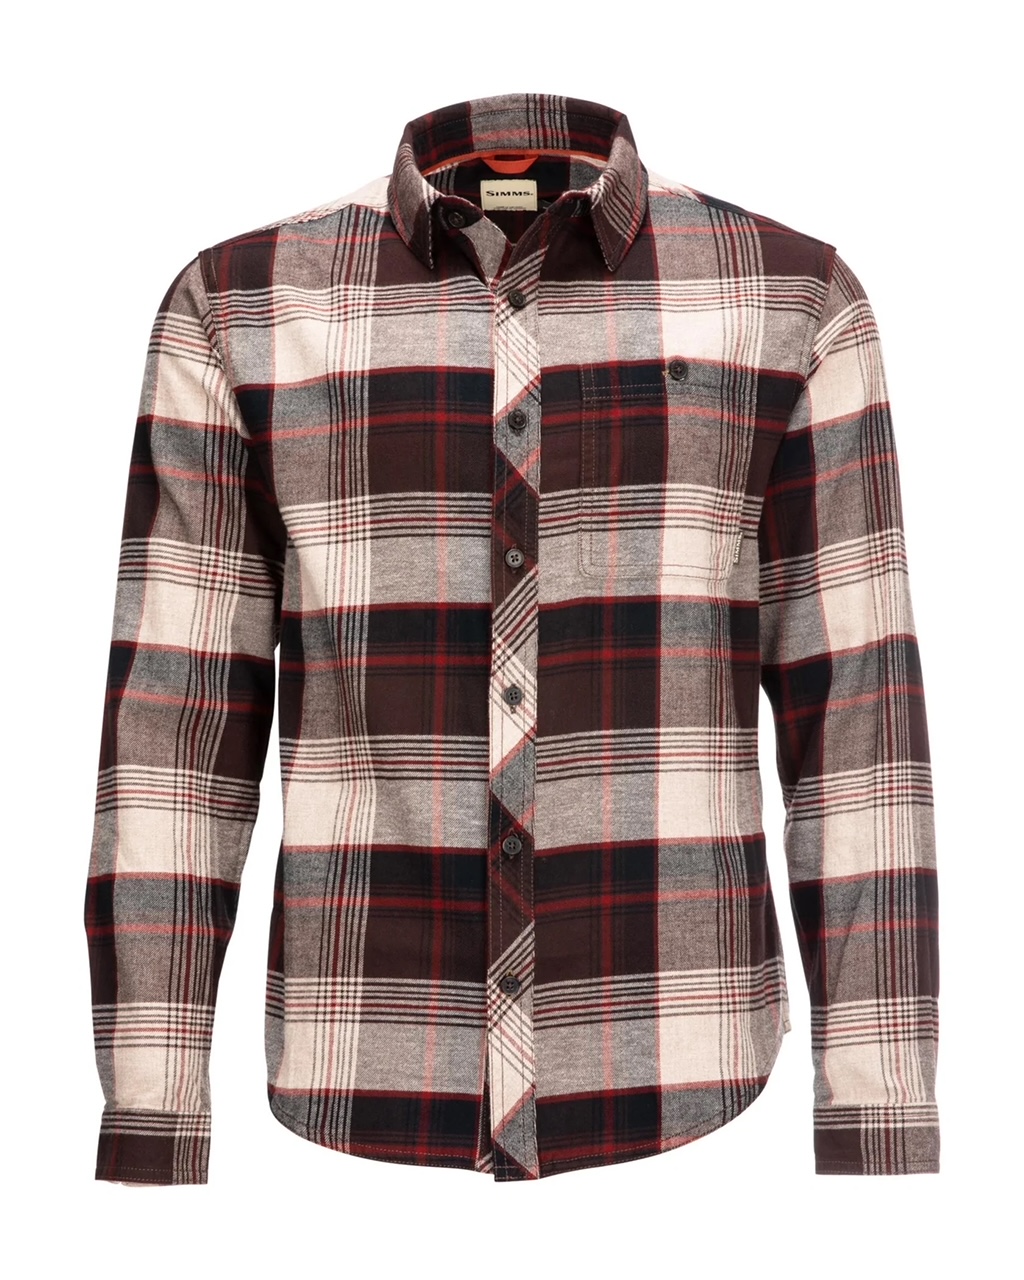 Simms M's Dockwear Cotton Flannel - Mahogany Red Plaid - Large